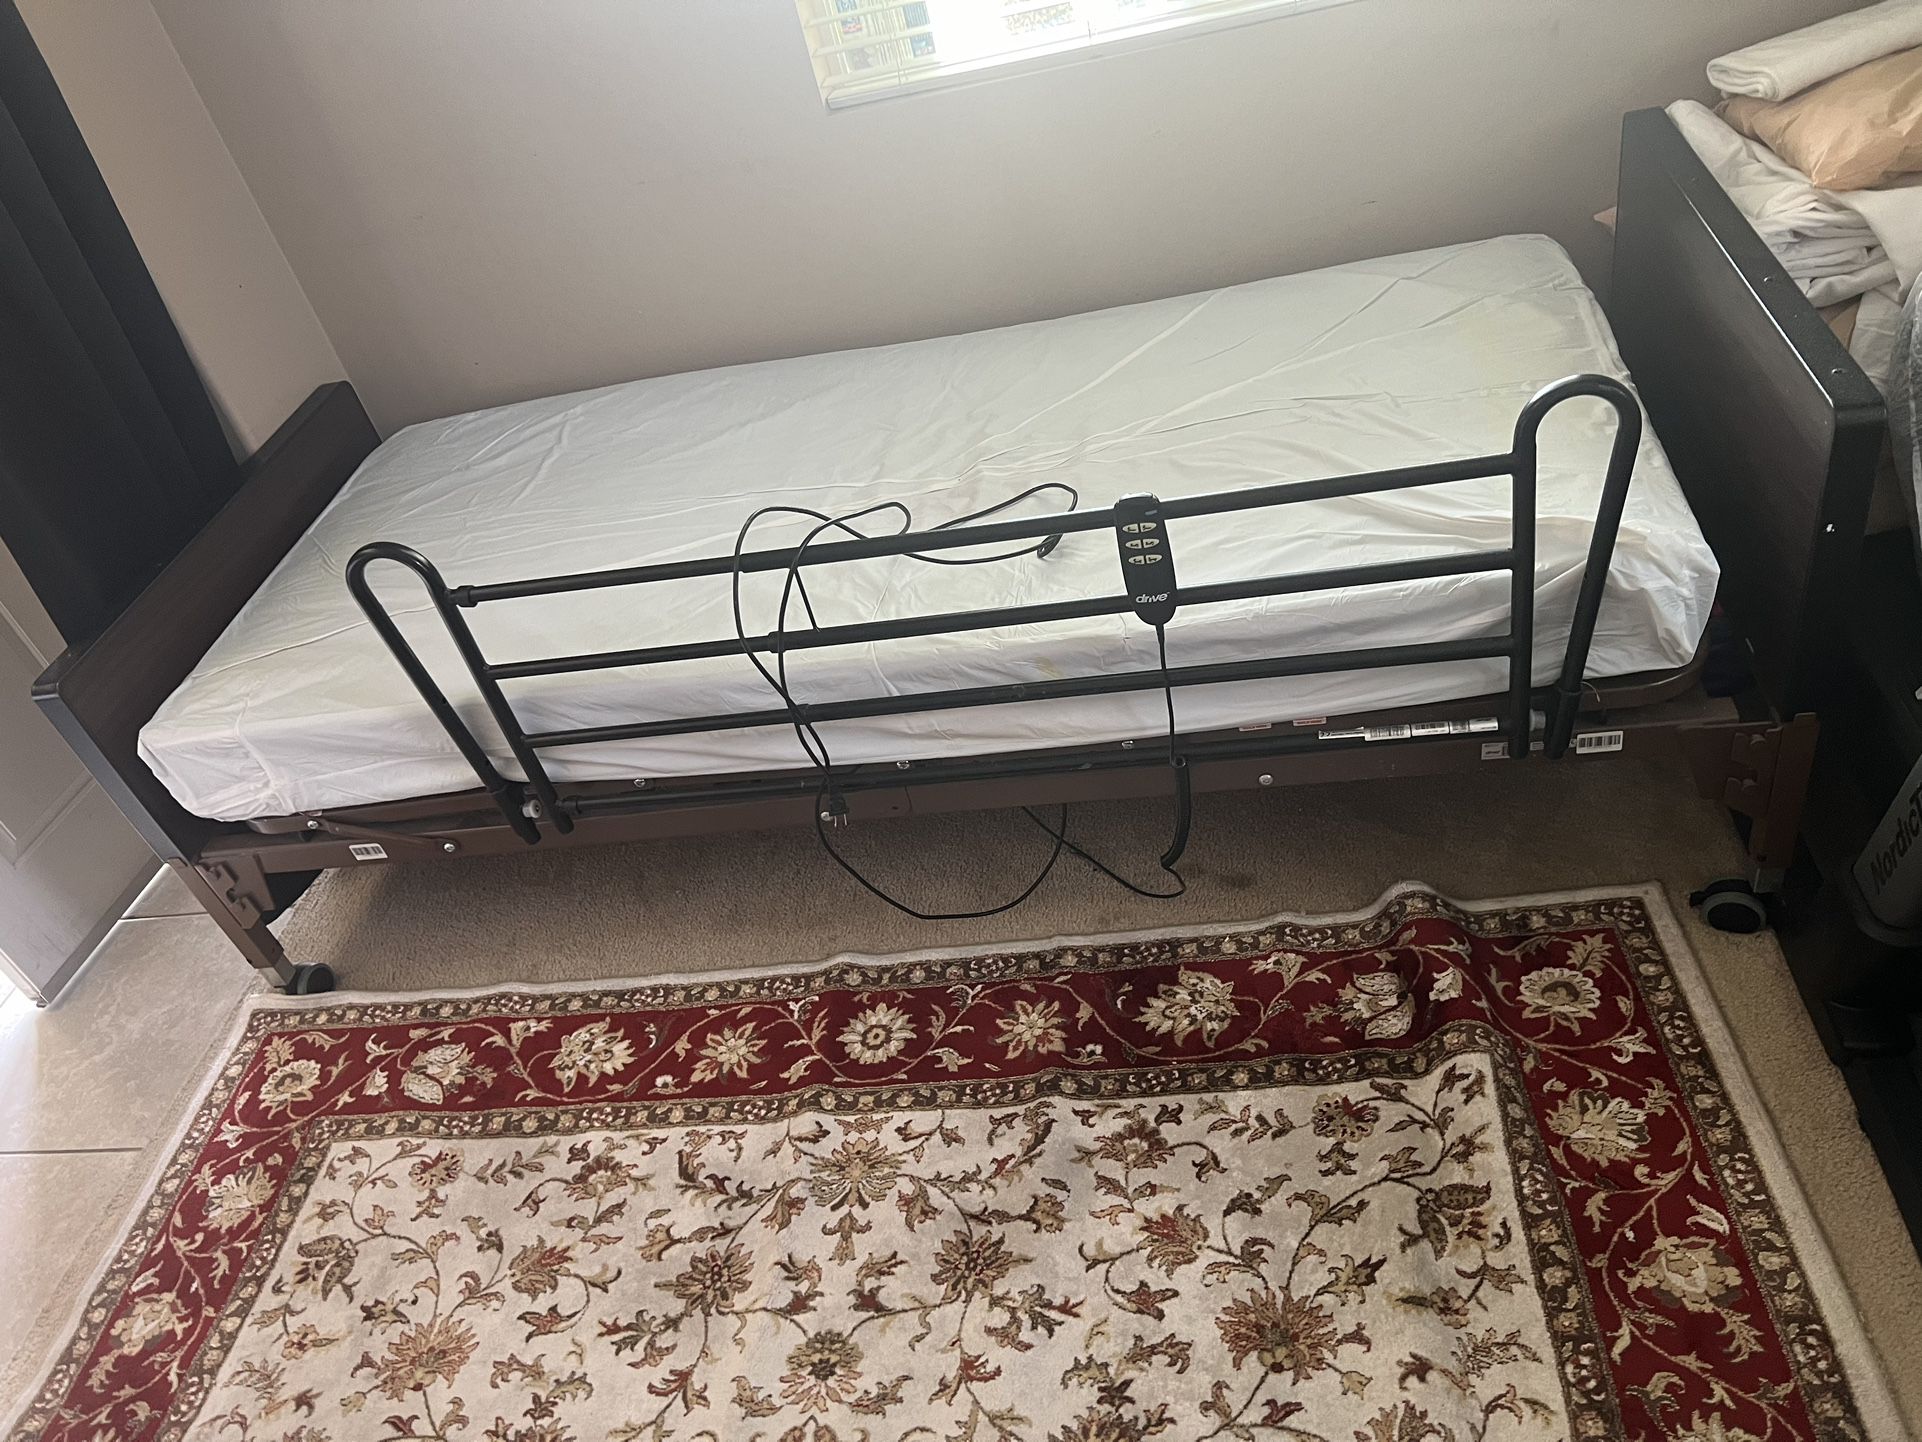 Electric Bed 